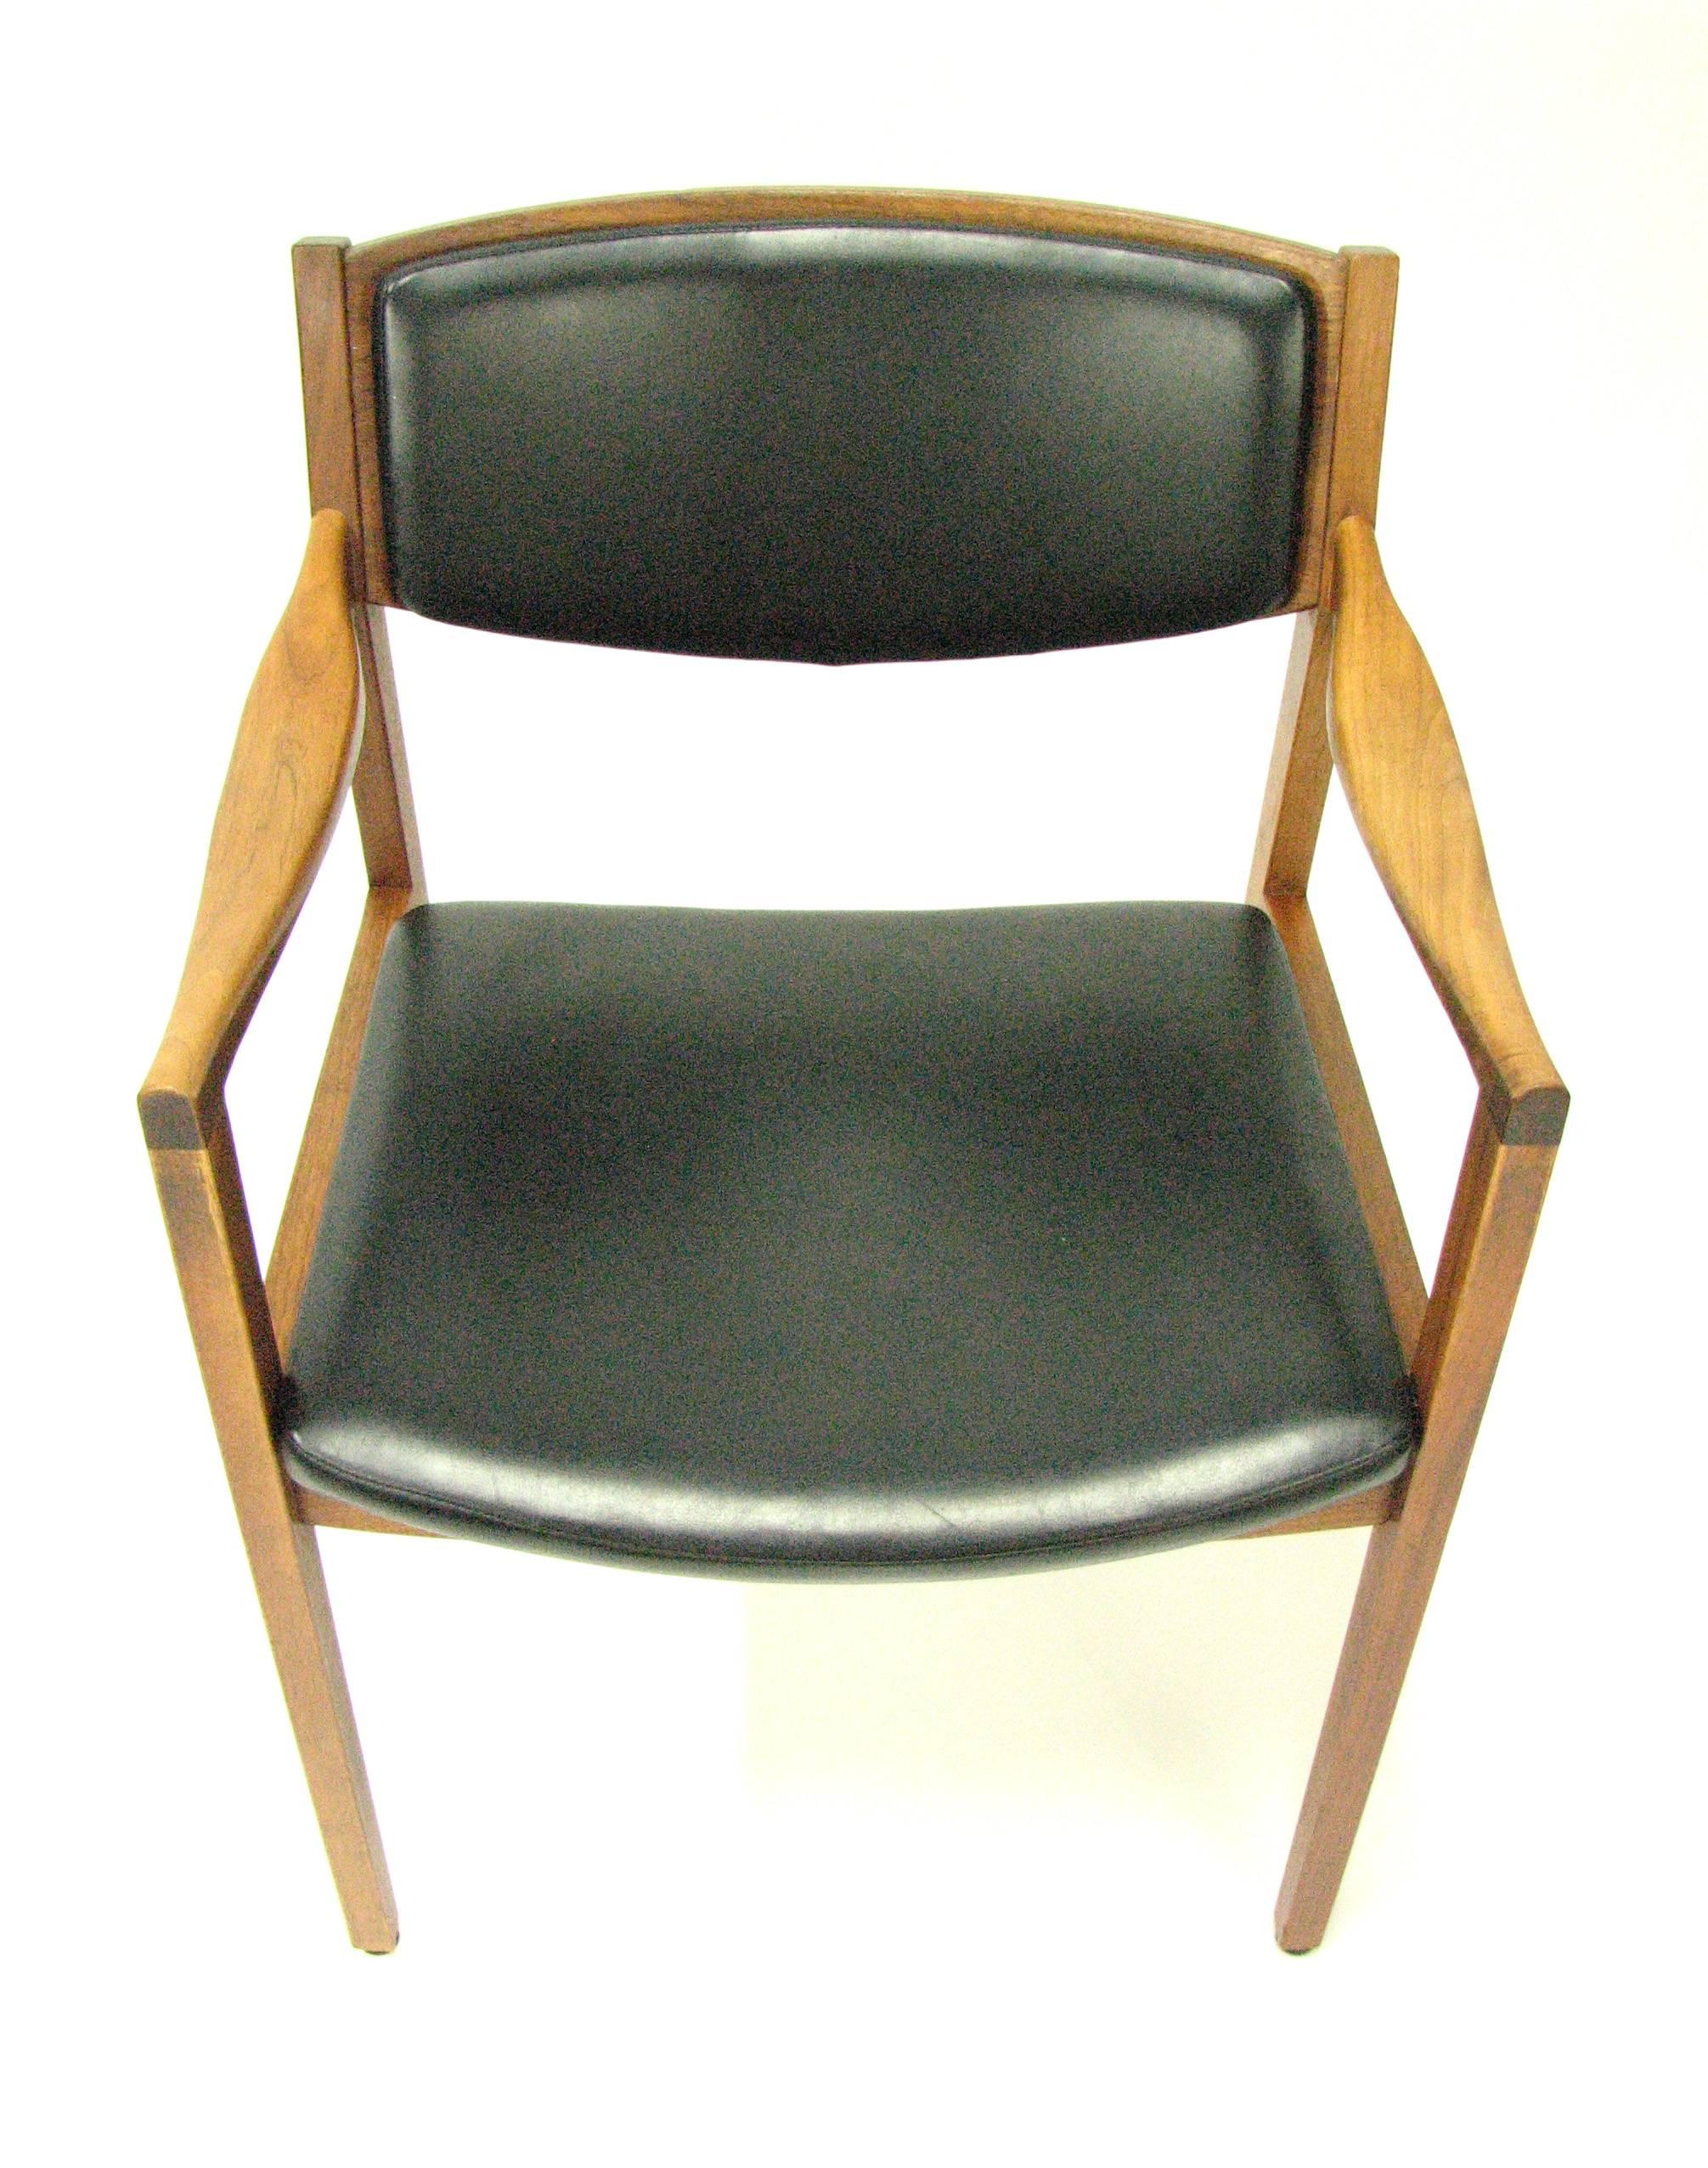 Pair of Classic Mid-Century Gunlocke Chairs in the Manner of Jens Risom 2